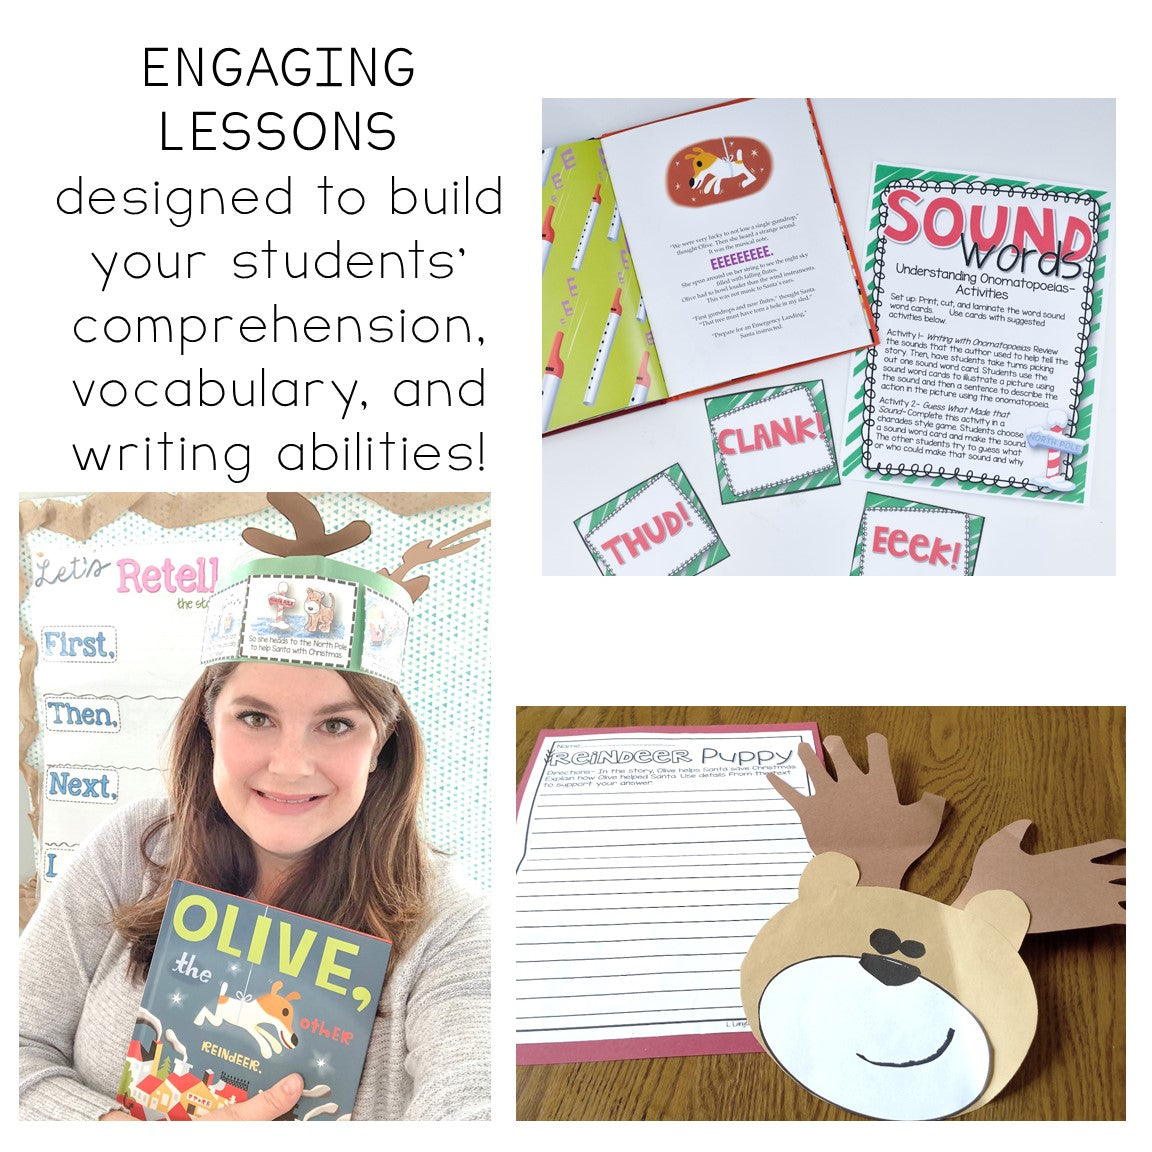 Olive the Other Reindeer Beyond the Text Activities